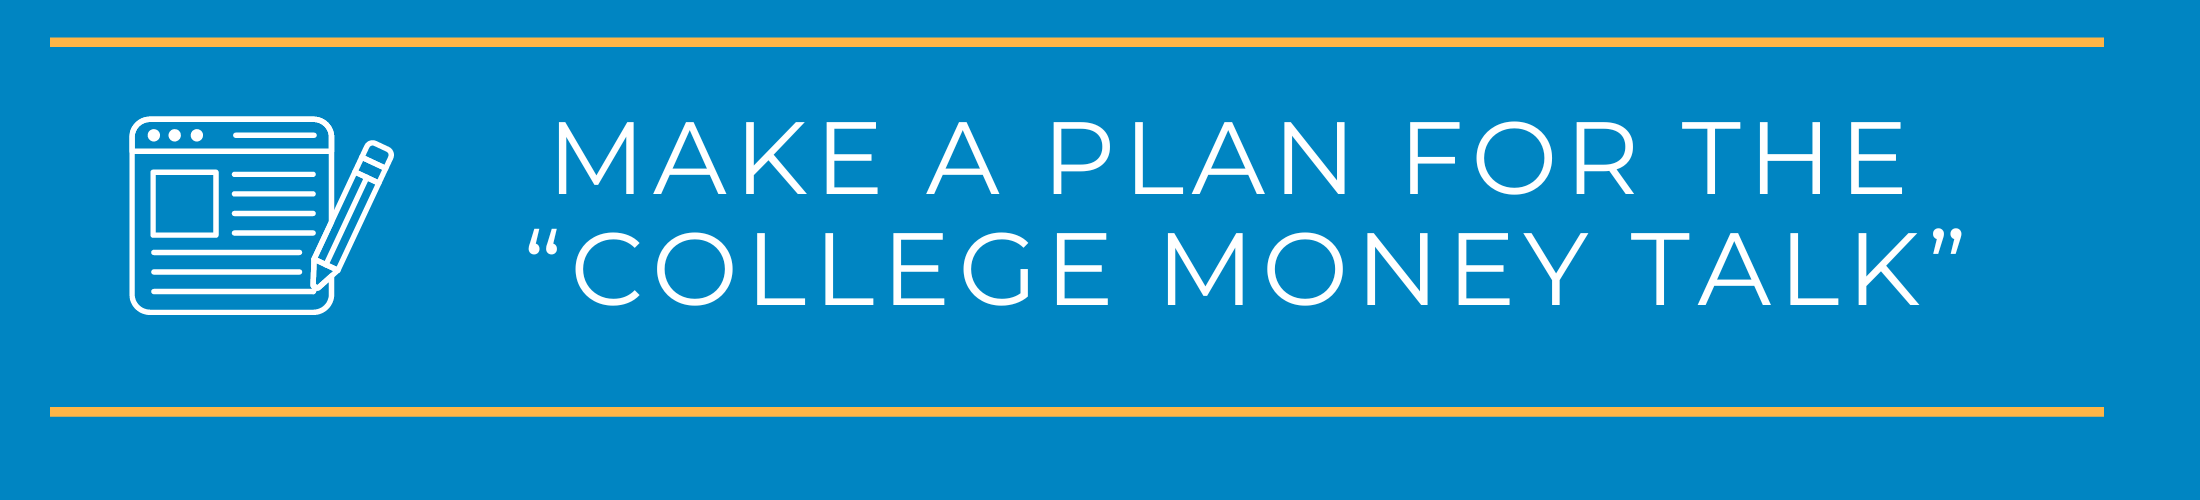 Make a Plan for the “College Money Talk”